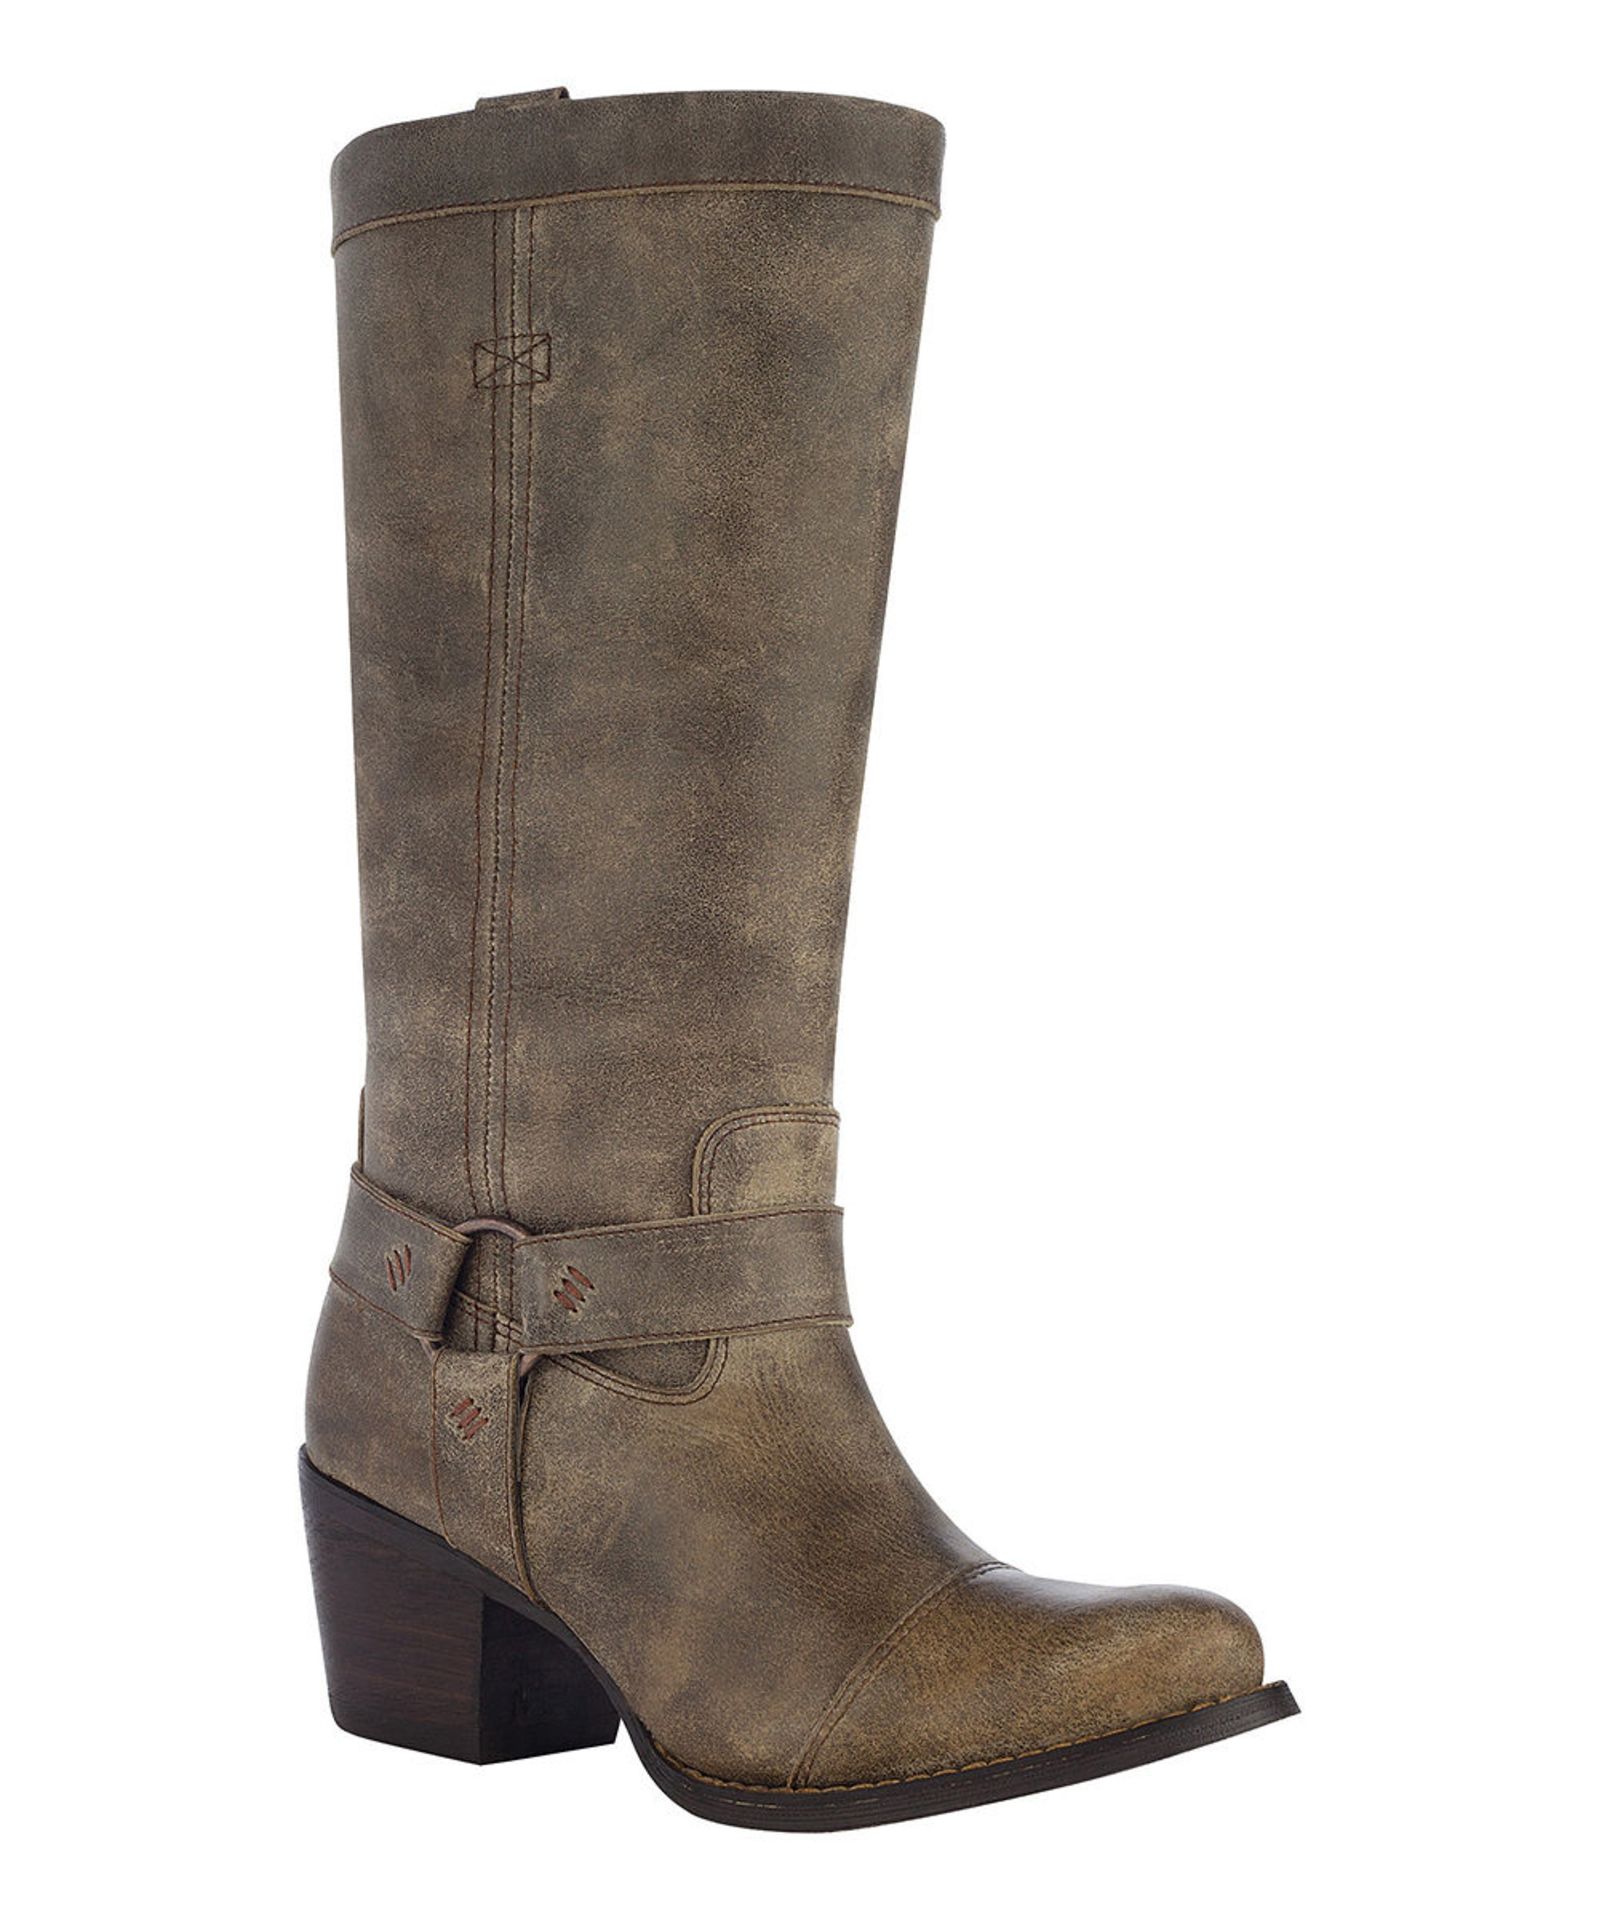 Durango, Gray Low Buckle Leather Boot - Women's, UK Size 7/US 9/EUR 41 (New with box) [Ref: